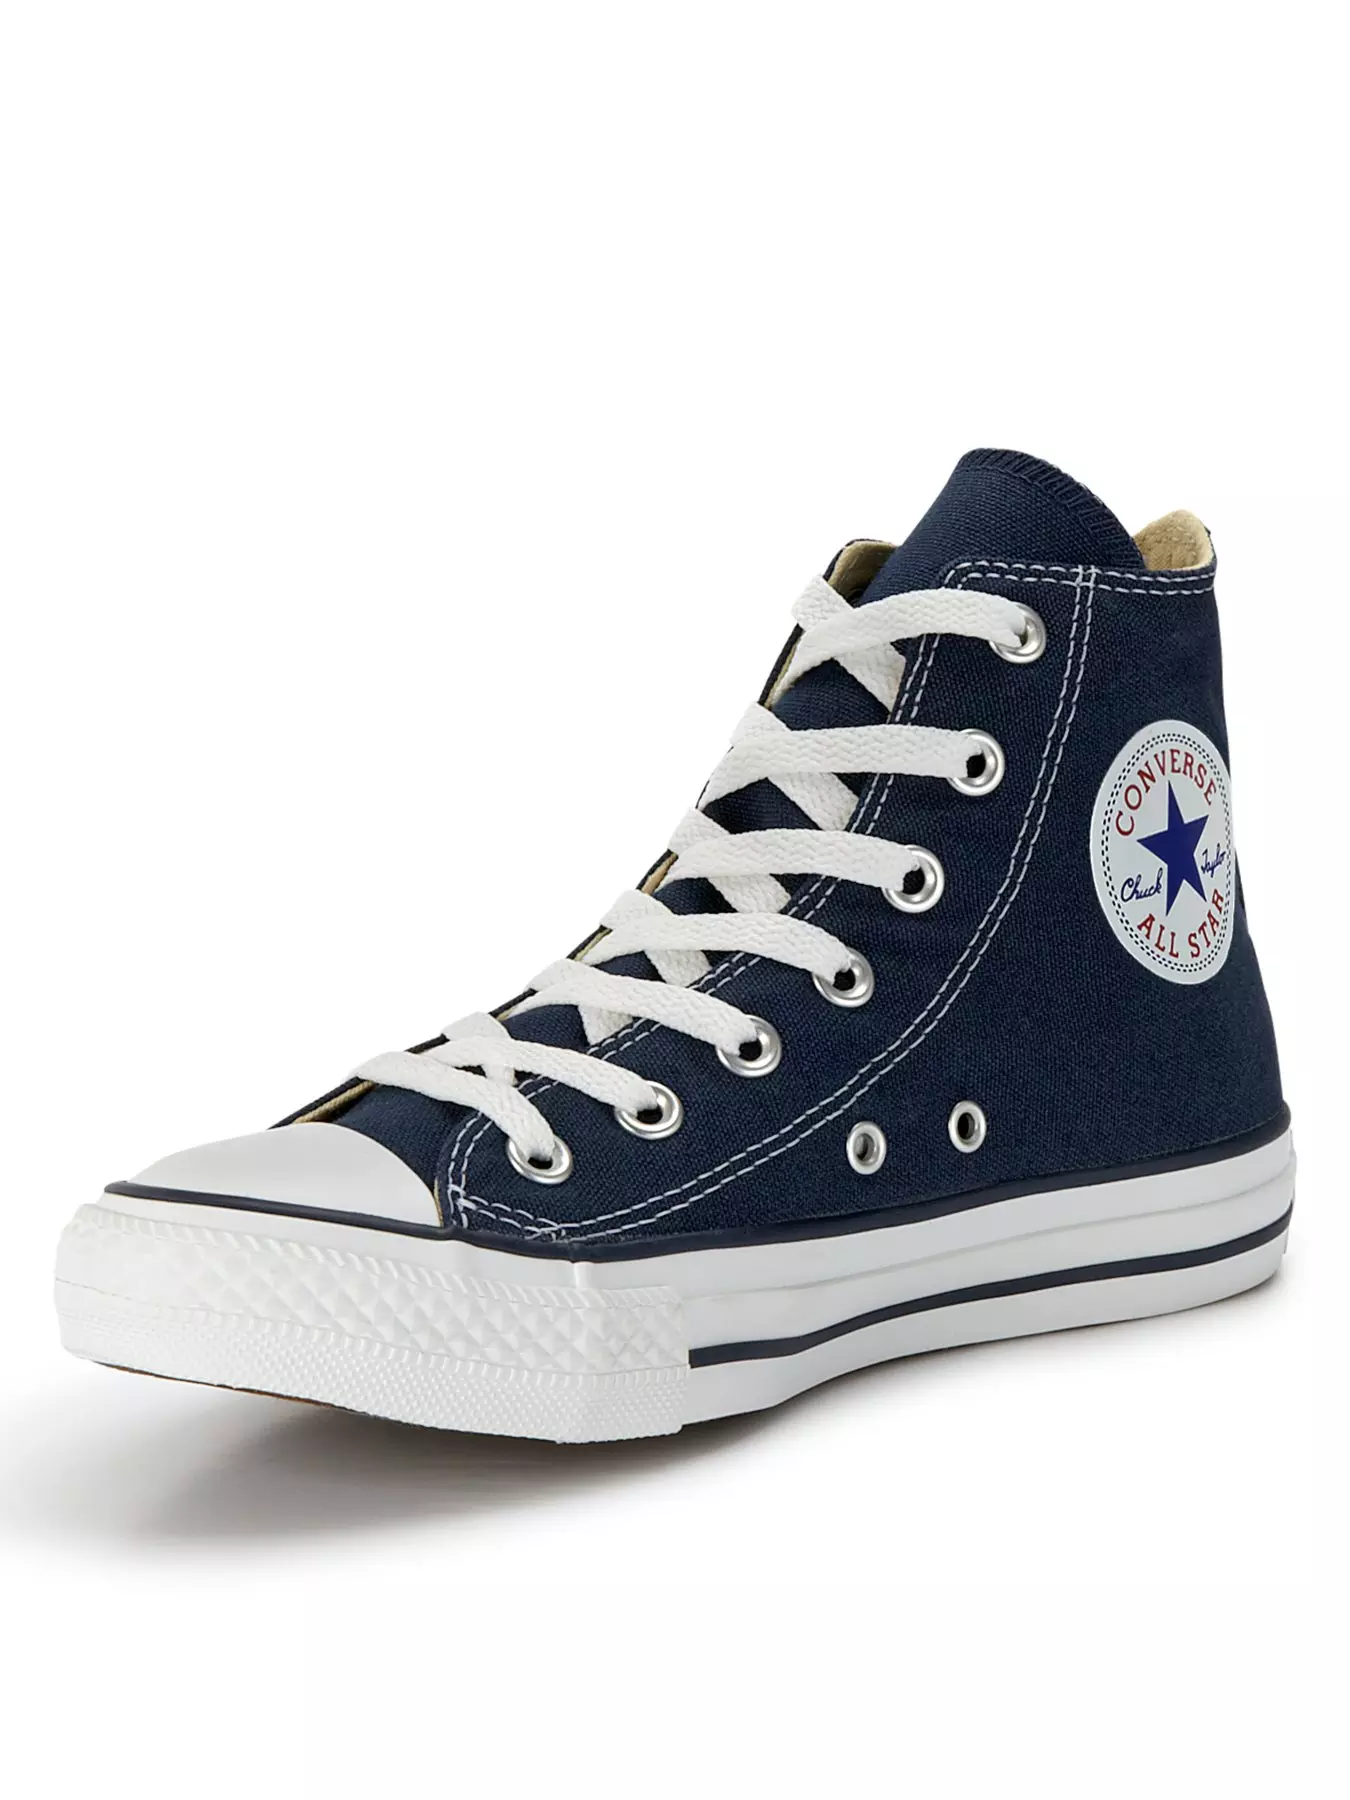 Converse All Star | Very.co.uk